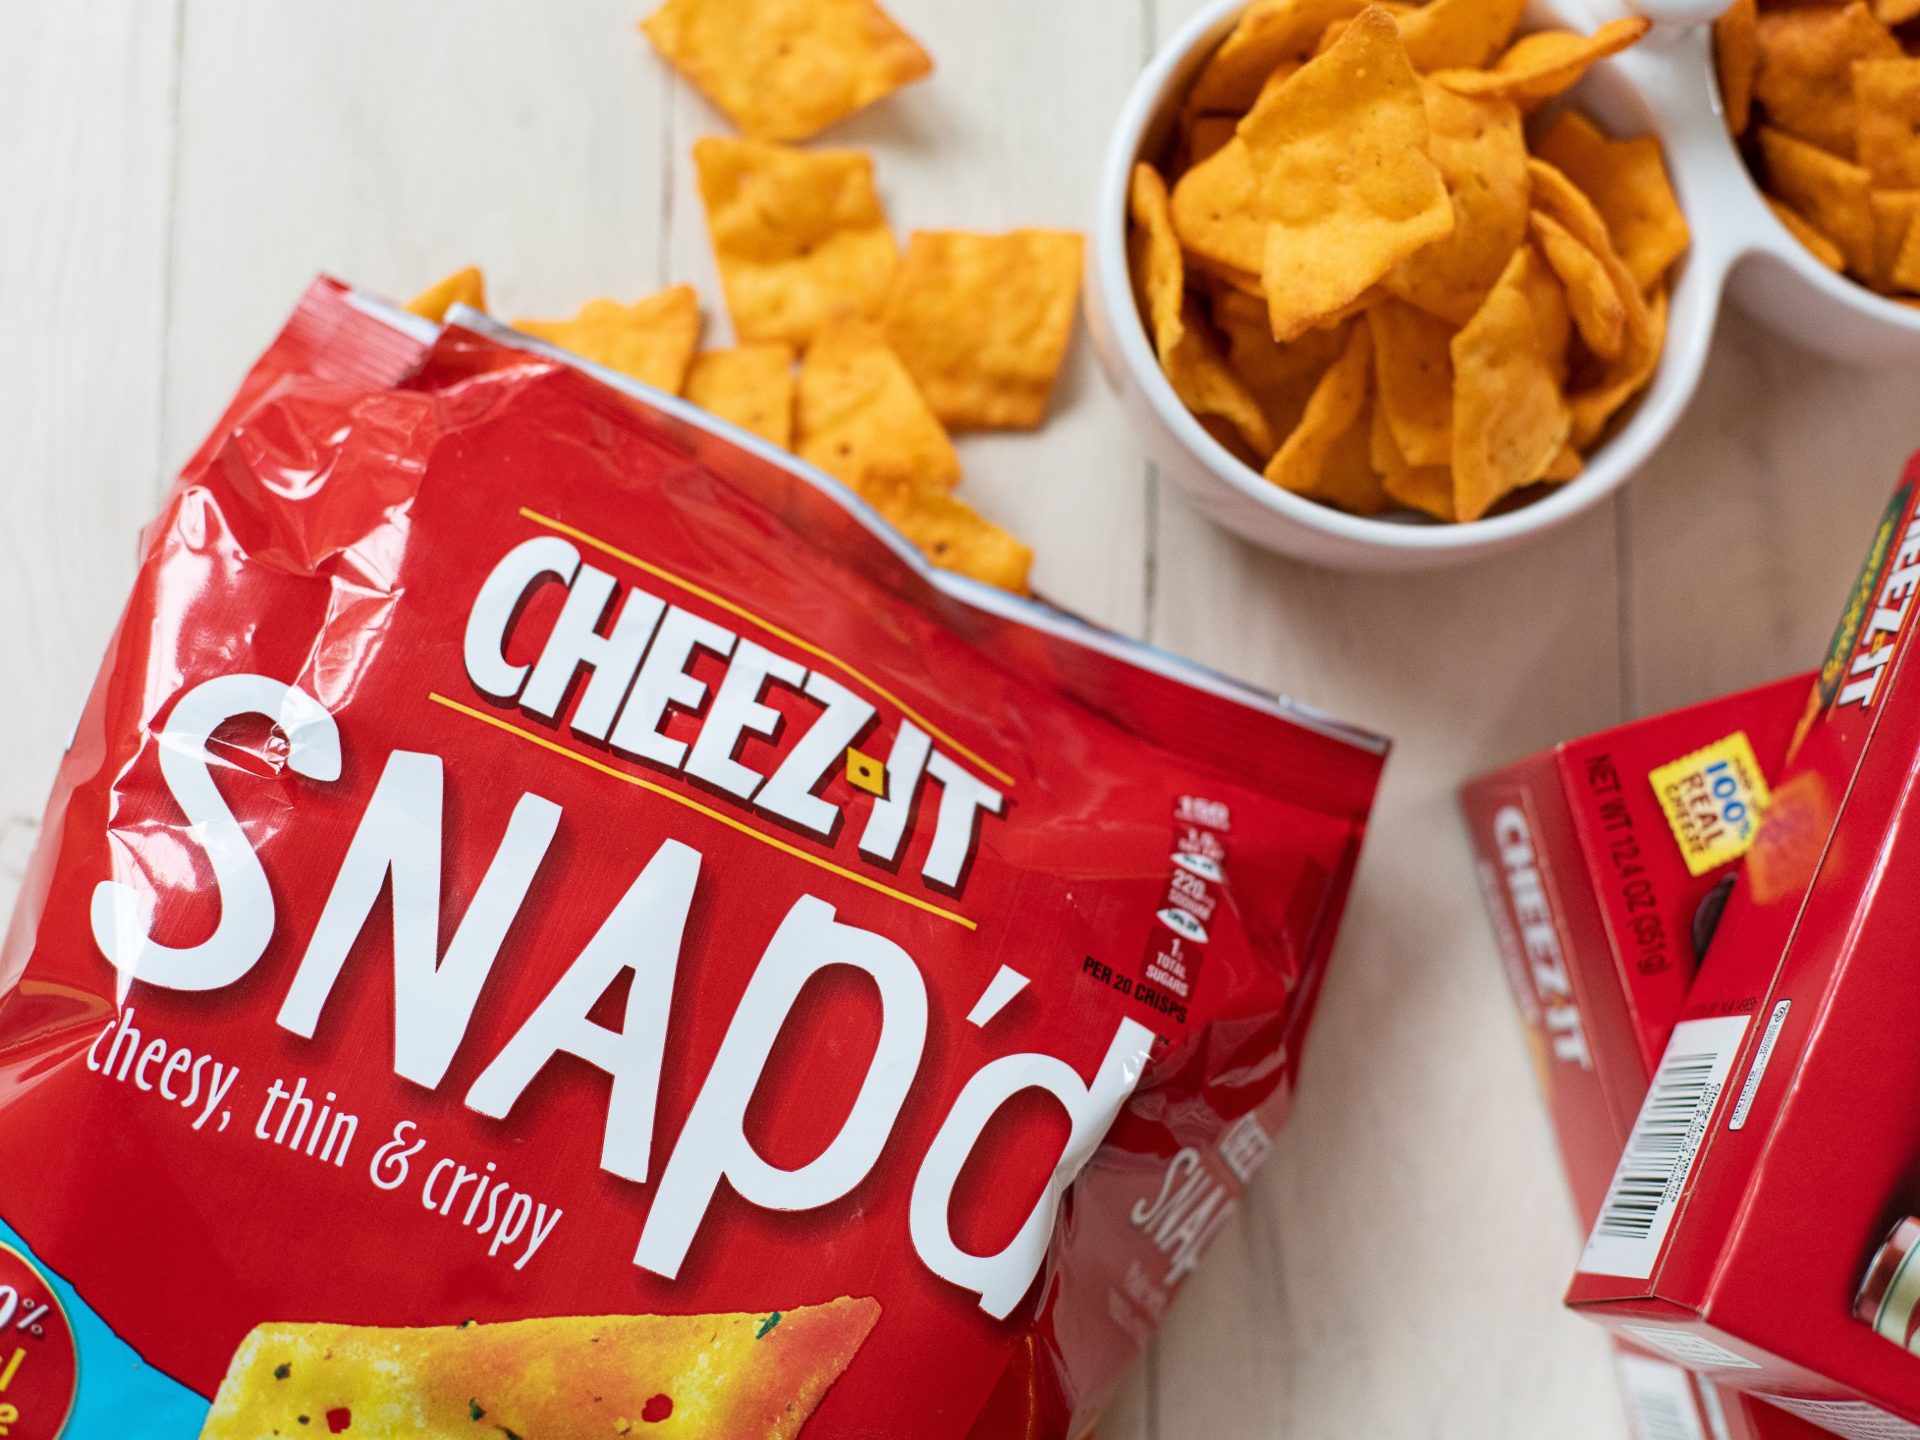 Cheez-It Snap’d Crackers As Low As 99¢ At Kroger